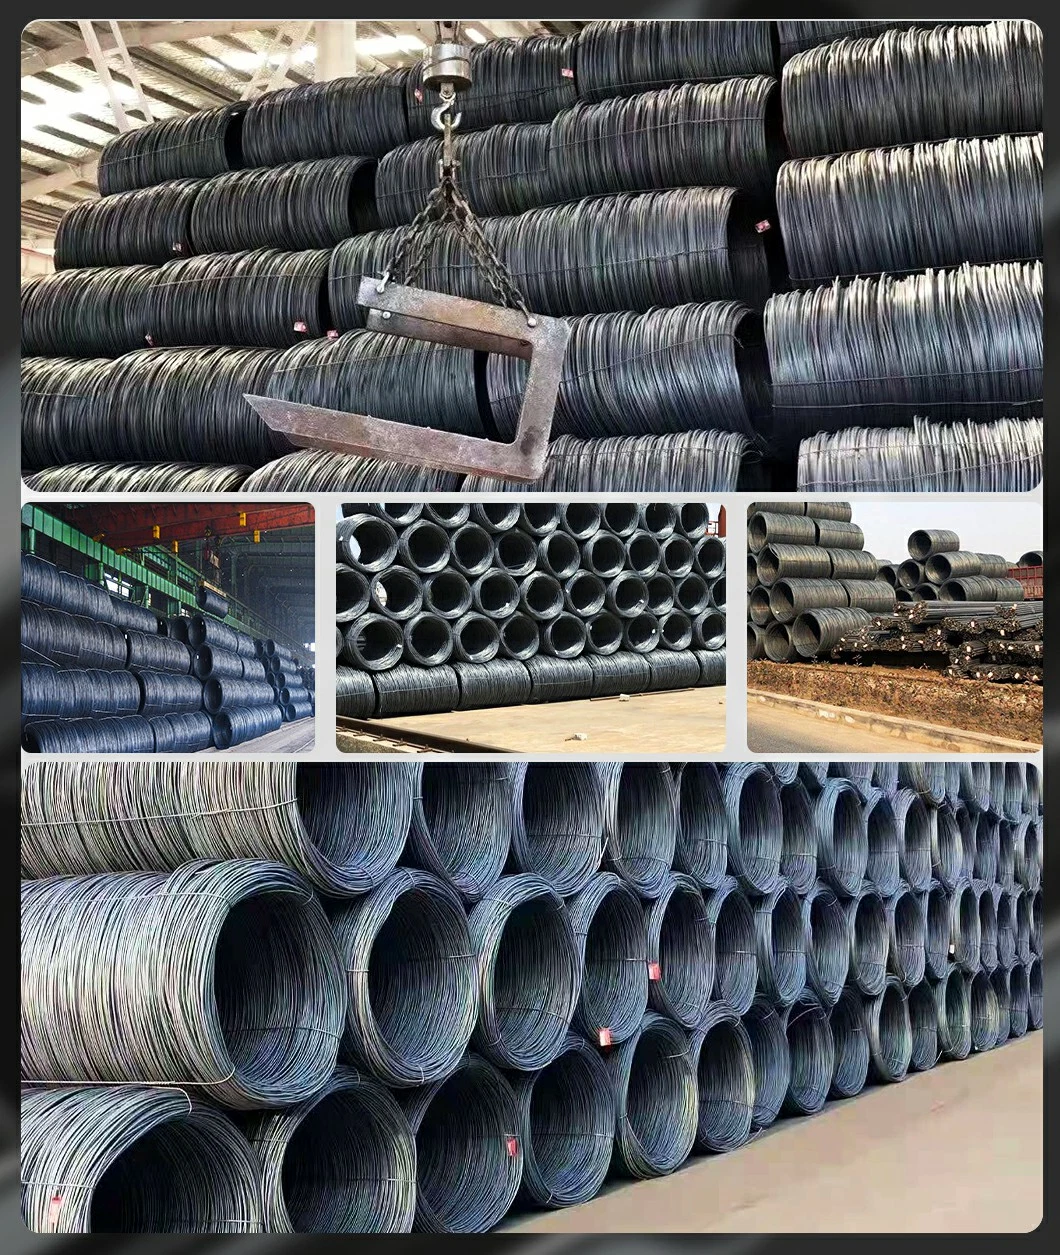 High Carbon Steel Wire Rods Low Carbon Steel Wire Rods 5mm 5.5mm 6mm 6.5mm 7mm 8mm 9mm 10mm 11mm 12mm 13mm 14mm Steel Wire Rods